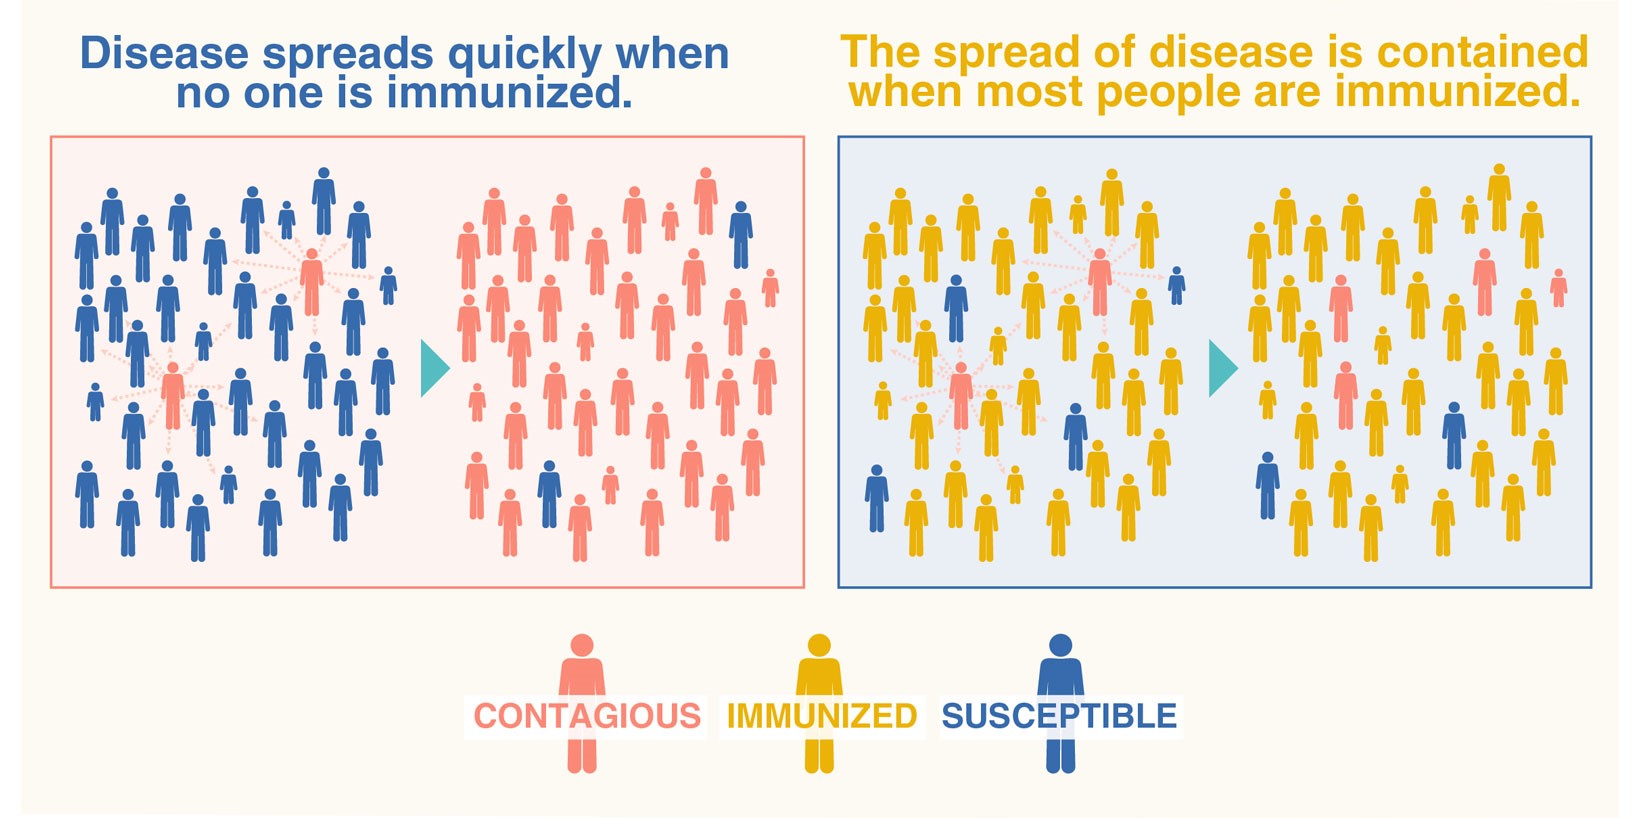 A graphic of two scenarios shows how community immunity works. On the right, the graphic indicates that many people are infected because disease spreads quickly when no one is immunized. On the left, the graphic shows that the spread of disease is contained when most people are immunized.